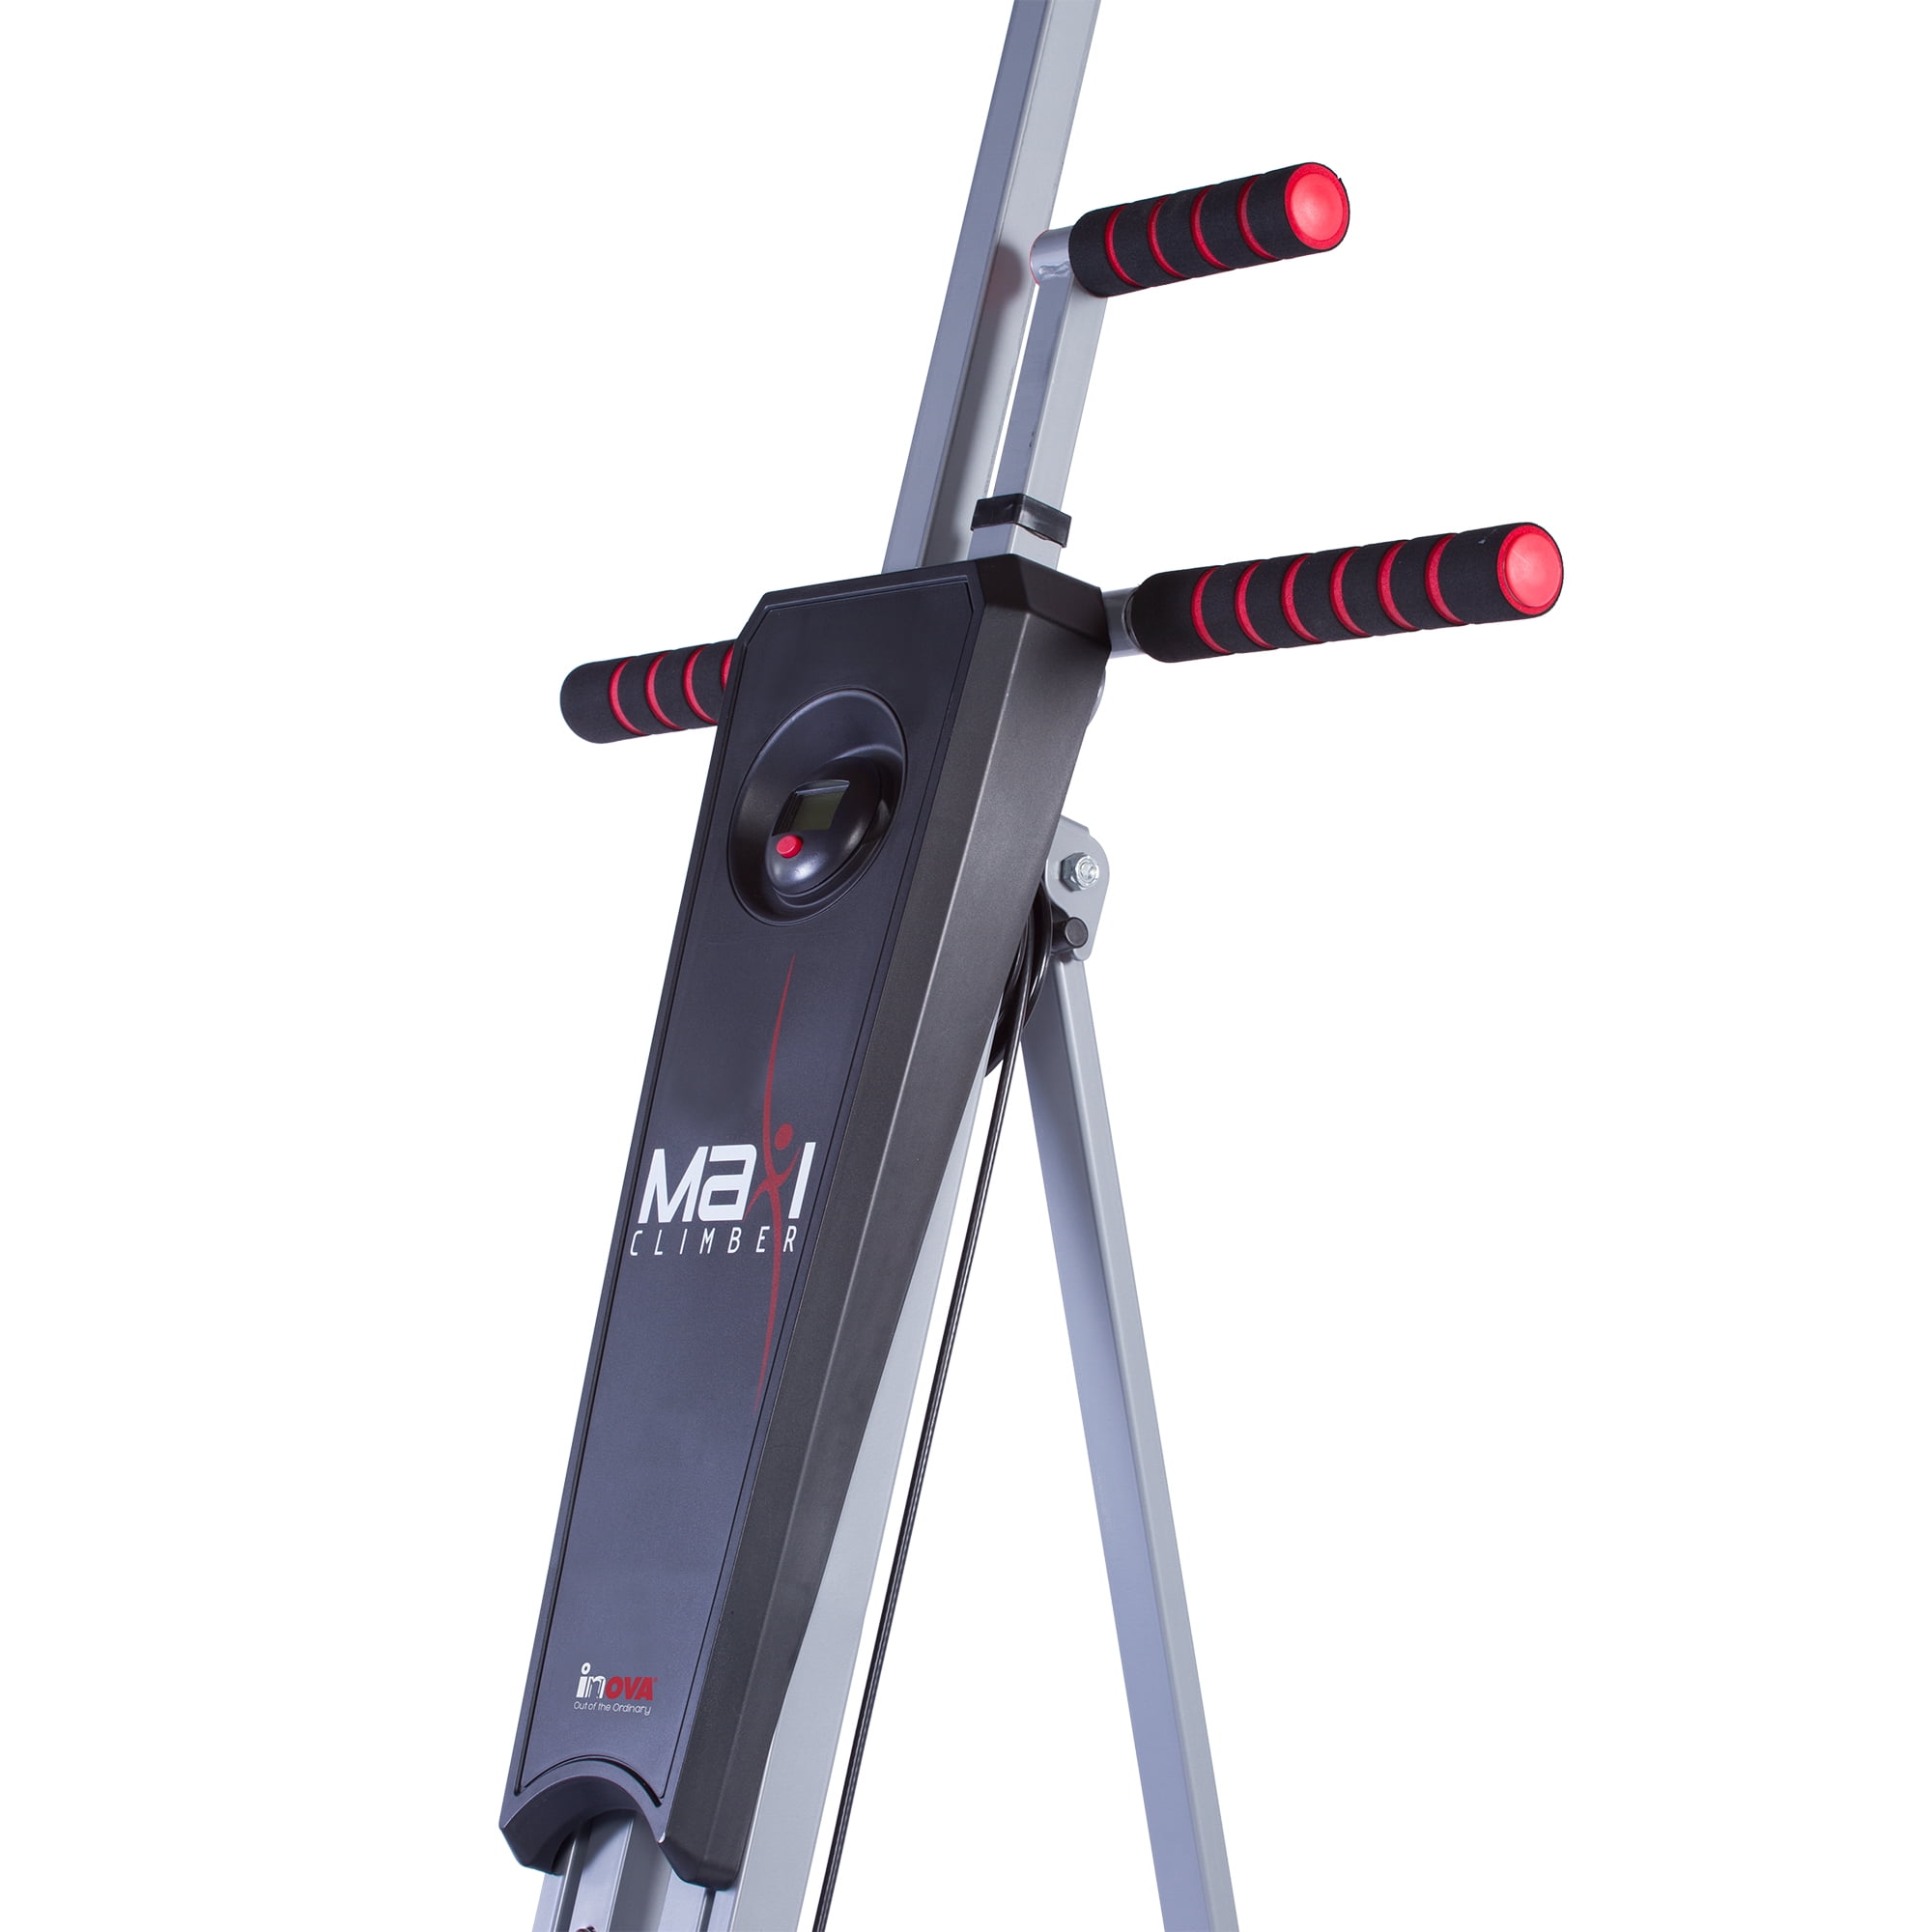 MaxiClimber Original Patented Full Body Workout Vertical Climber 400001986 for sale online 